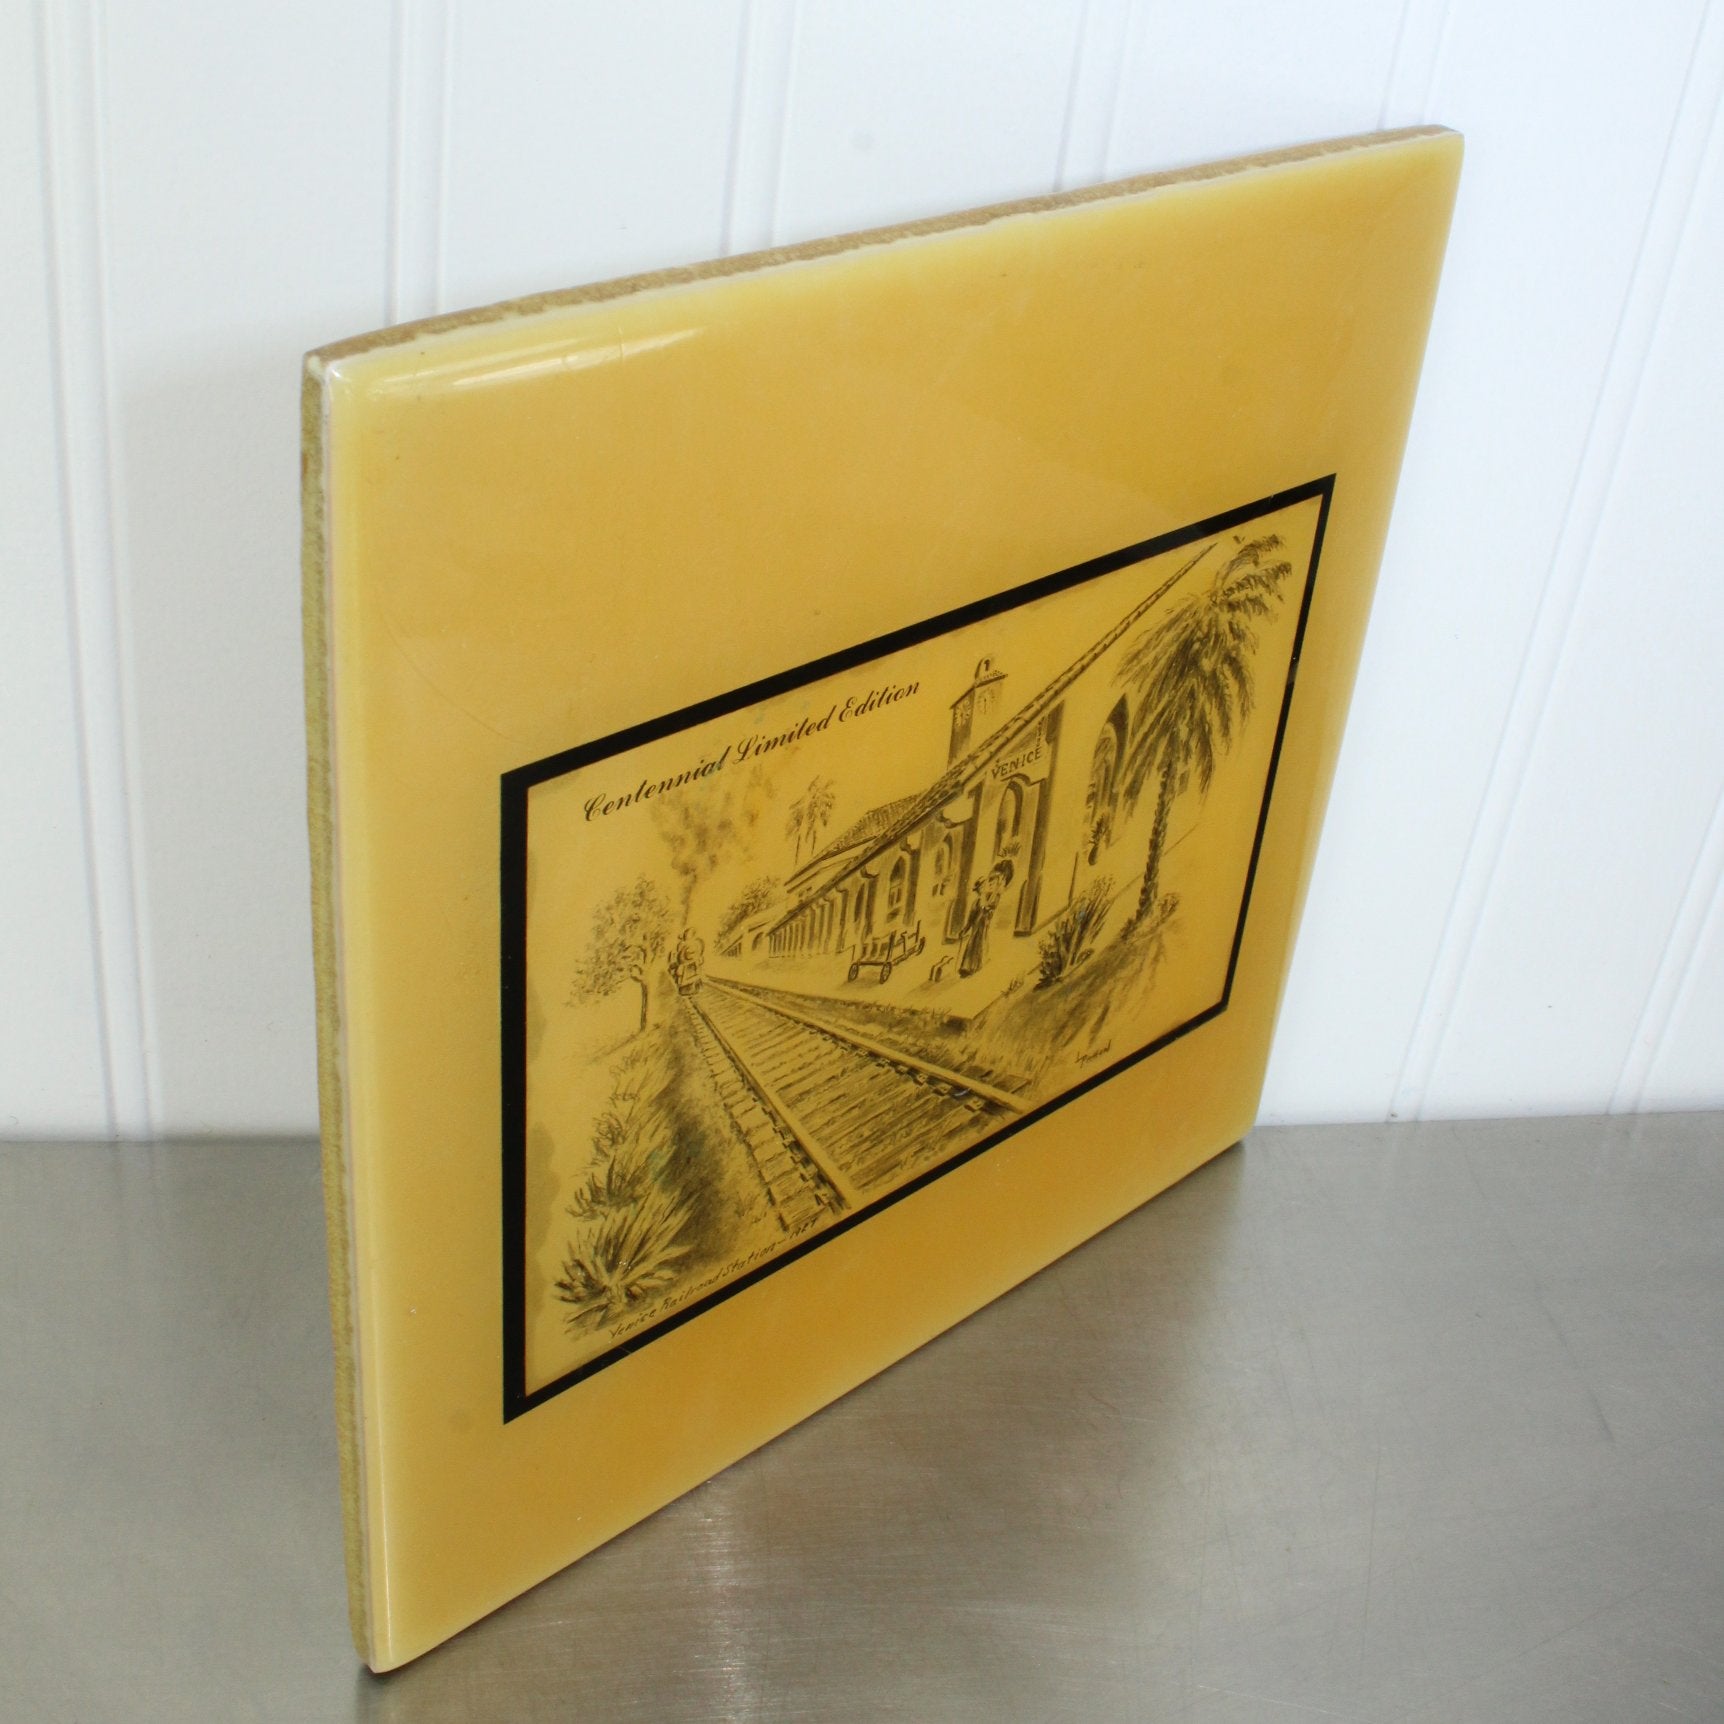 Railroad Station Venice Fl 1927 Glazed Tile Ltd Edition 8" side view showing thickness